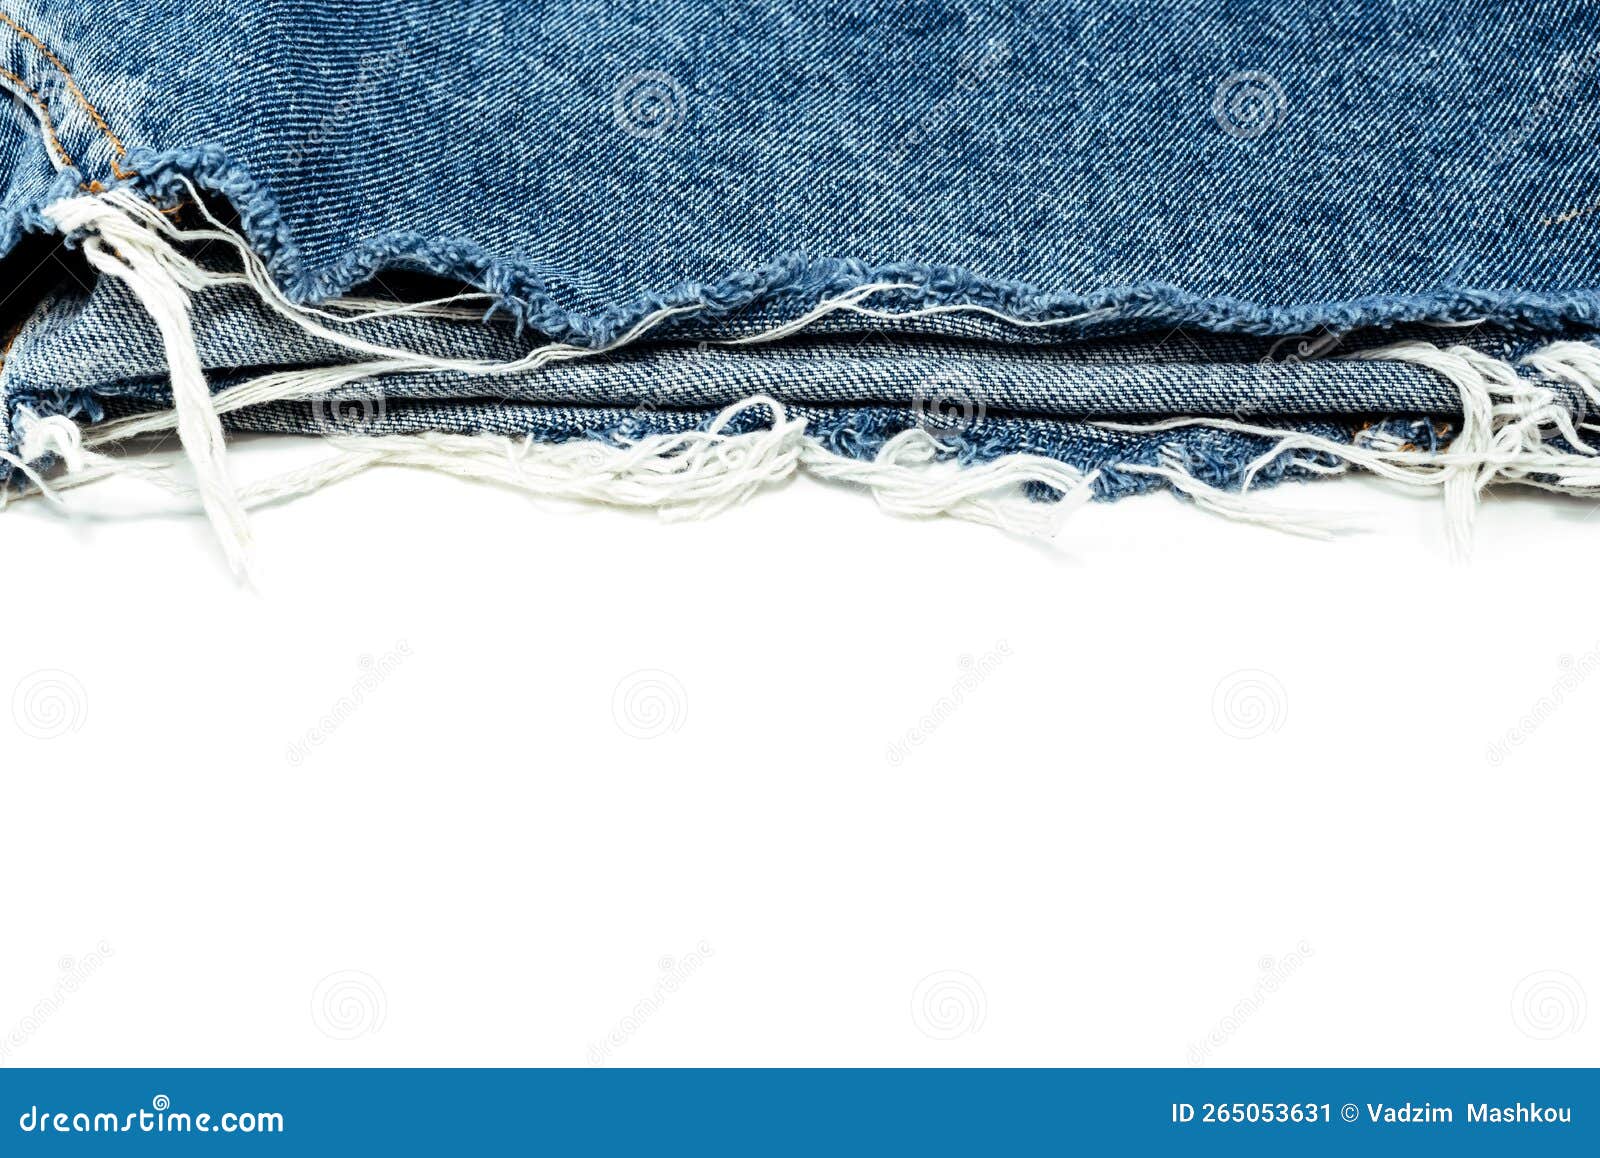 Discover 122+ ripped denim background